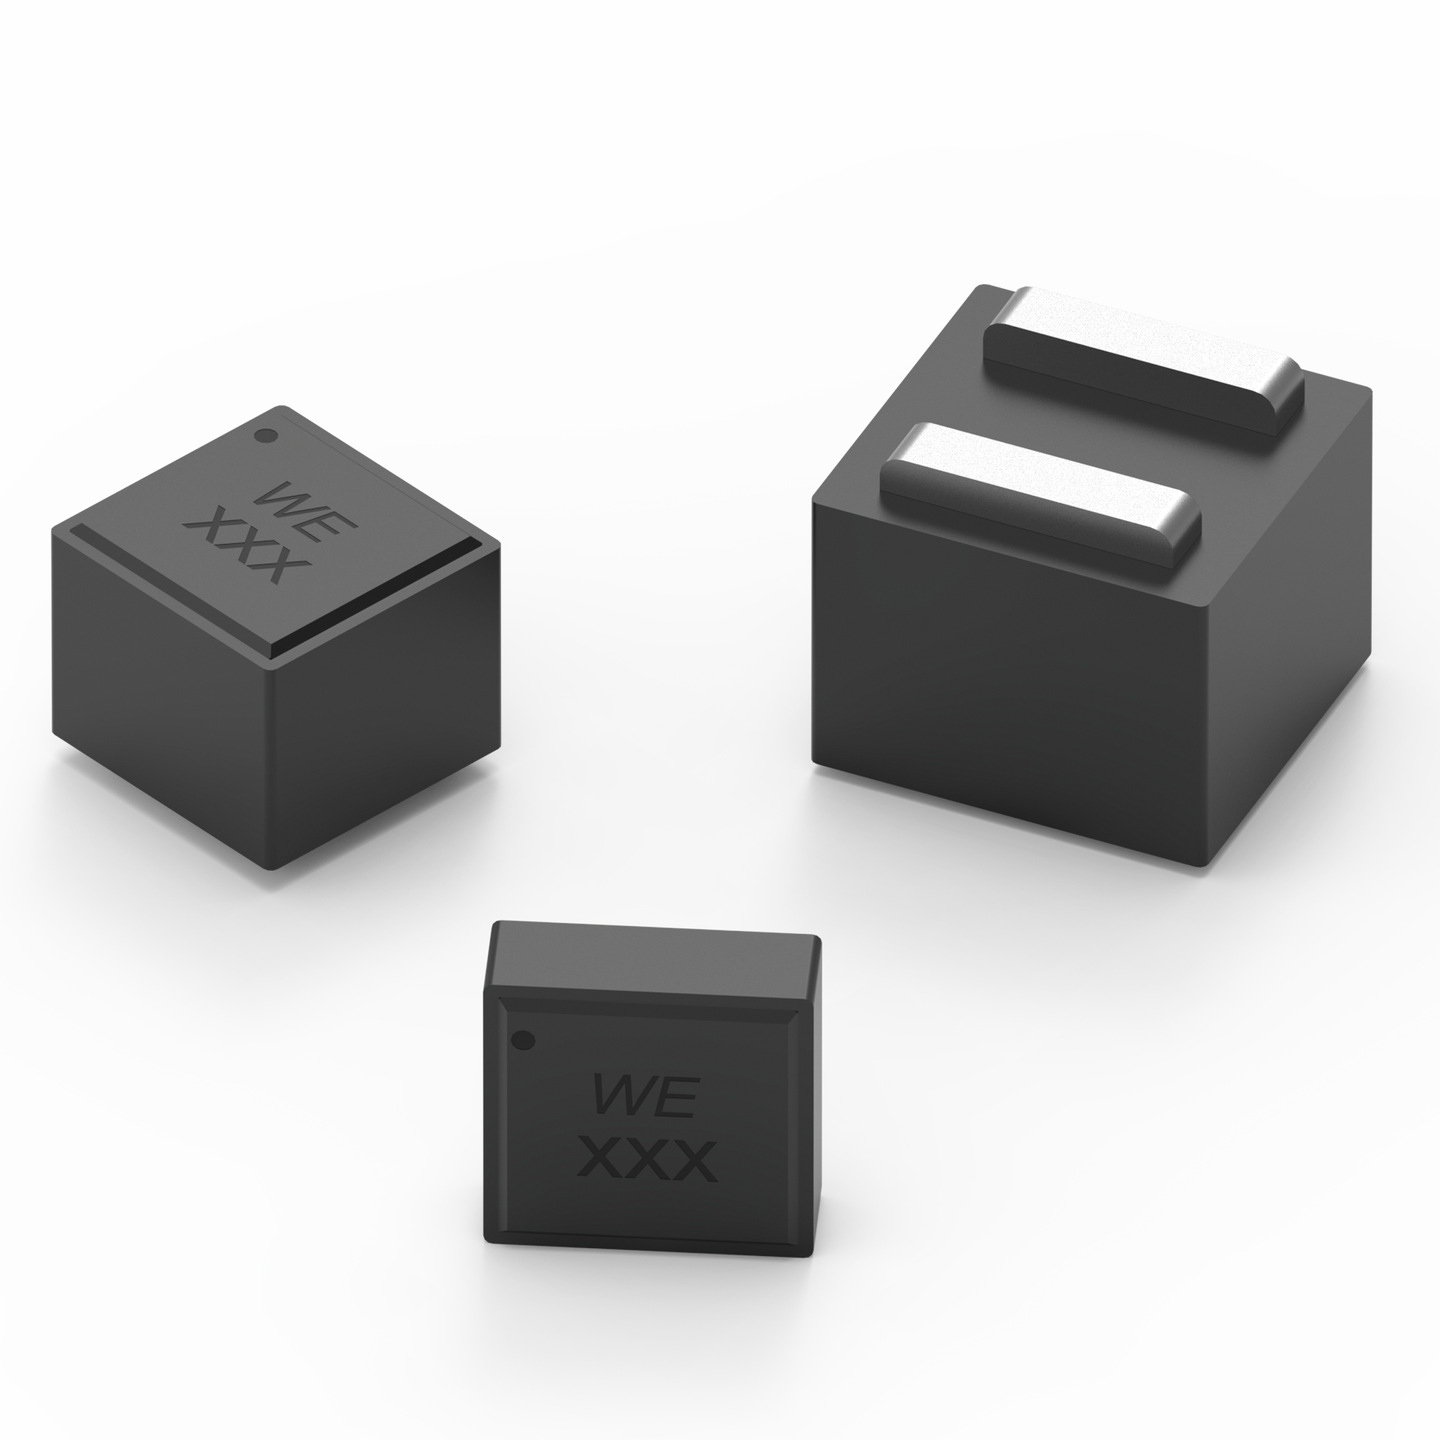 Würth Elektronik presents High current inductor for automotive applications